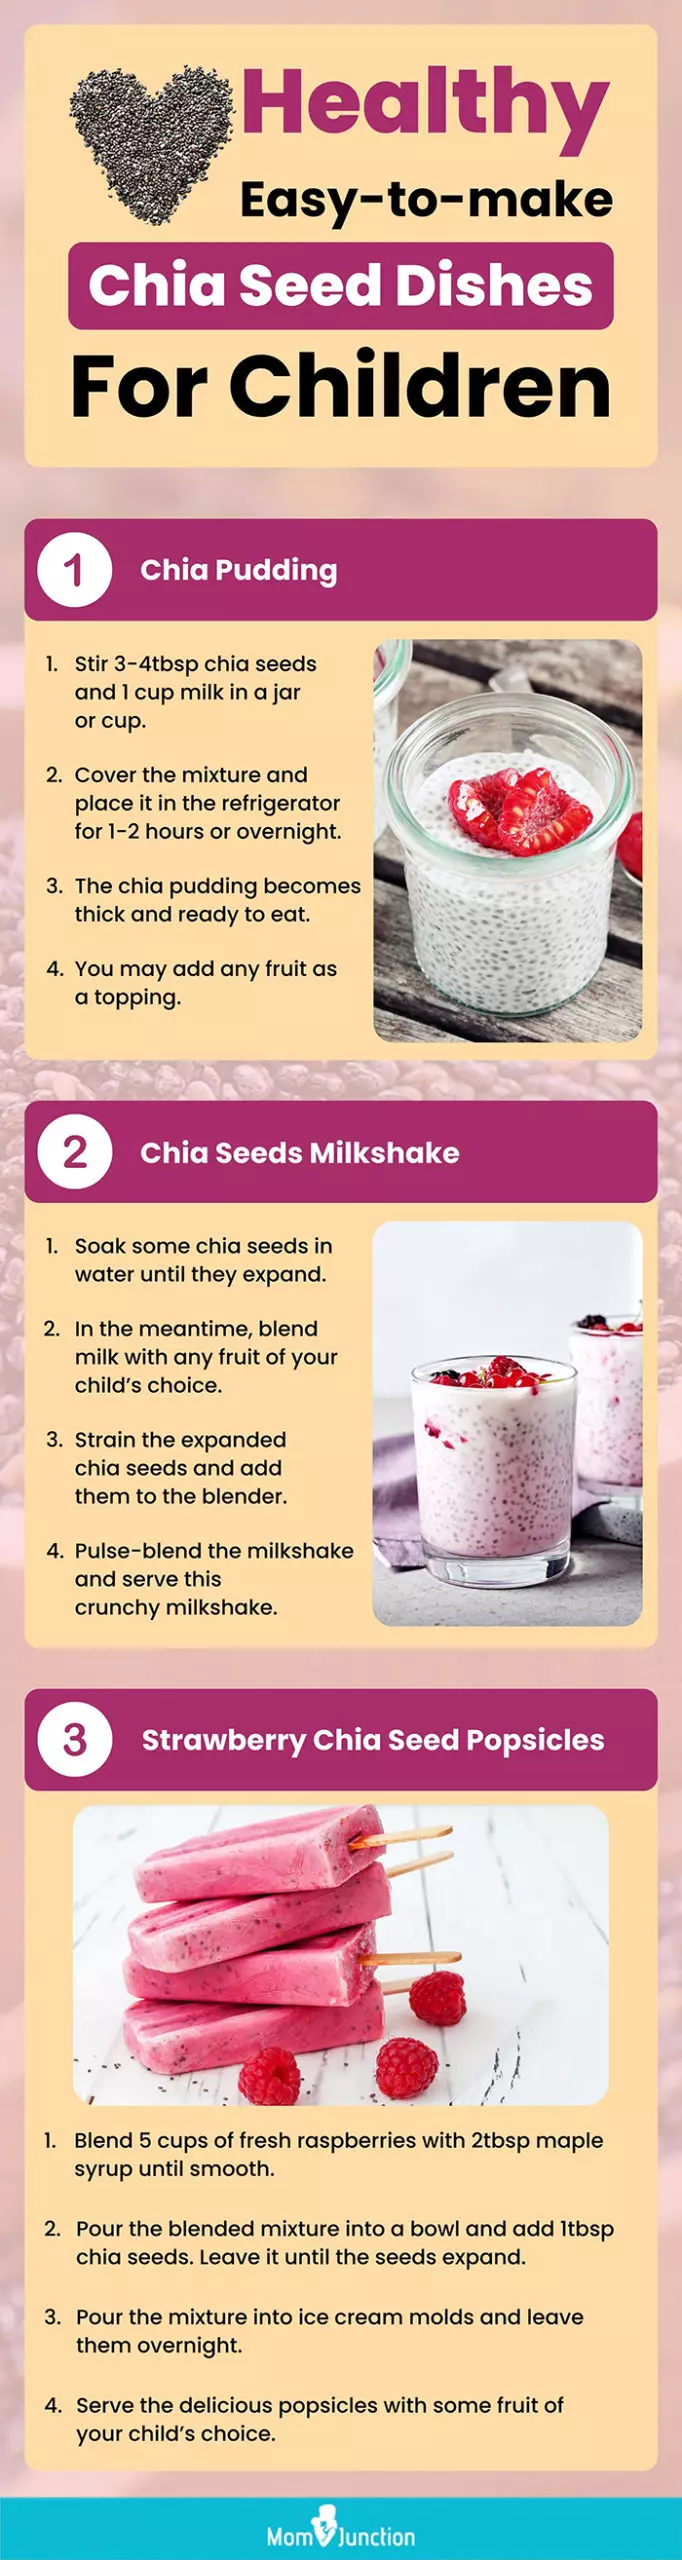 chia seed dishes for children (infographic)